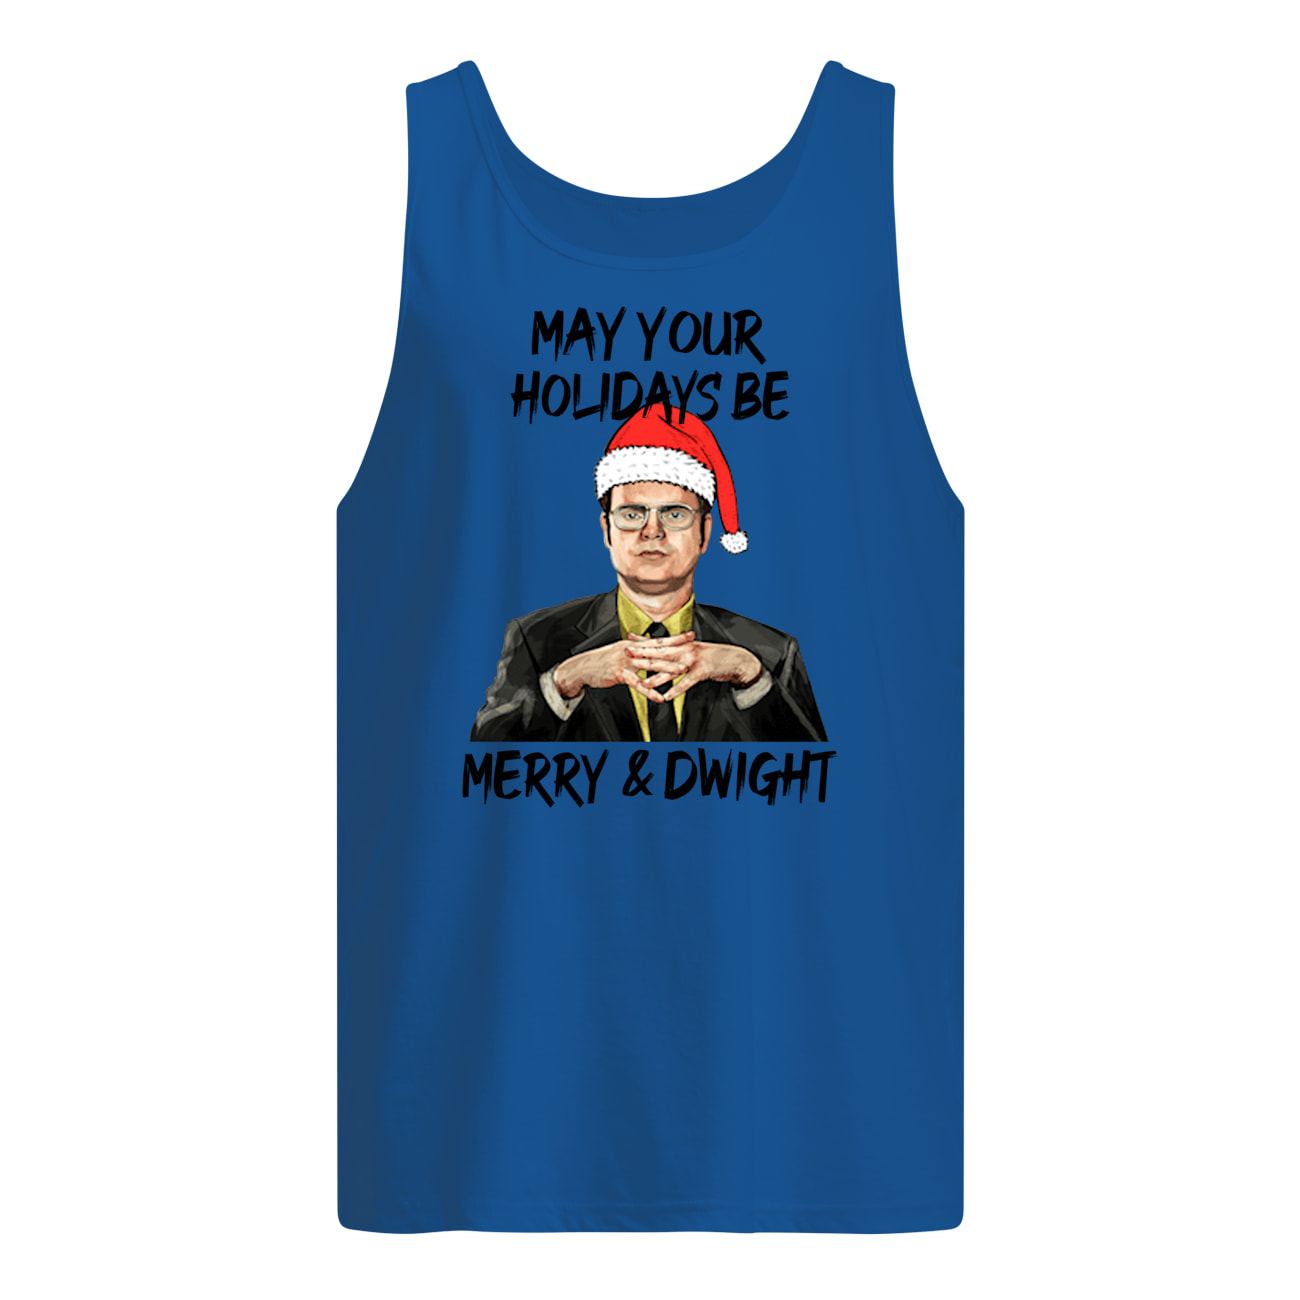 The office may your christmas be merry and dwight christmas tank top